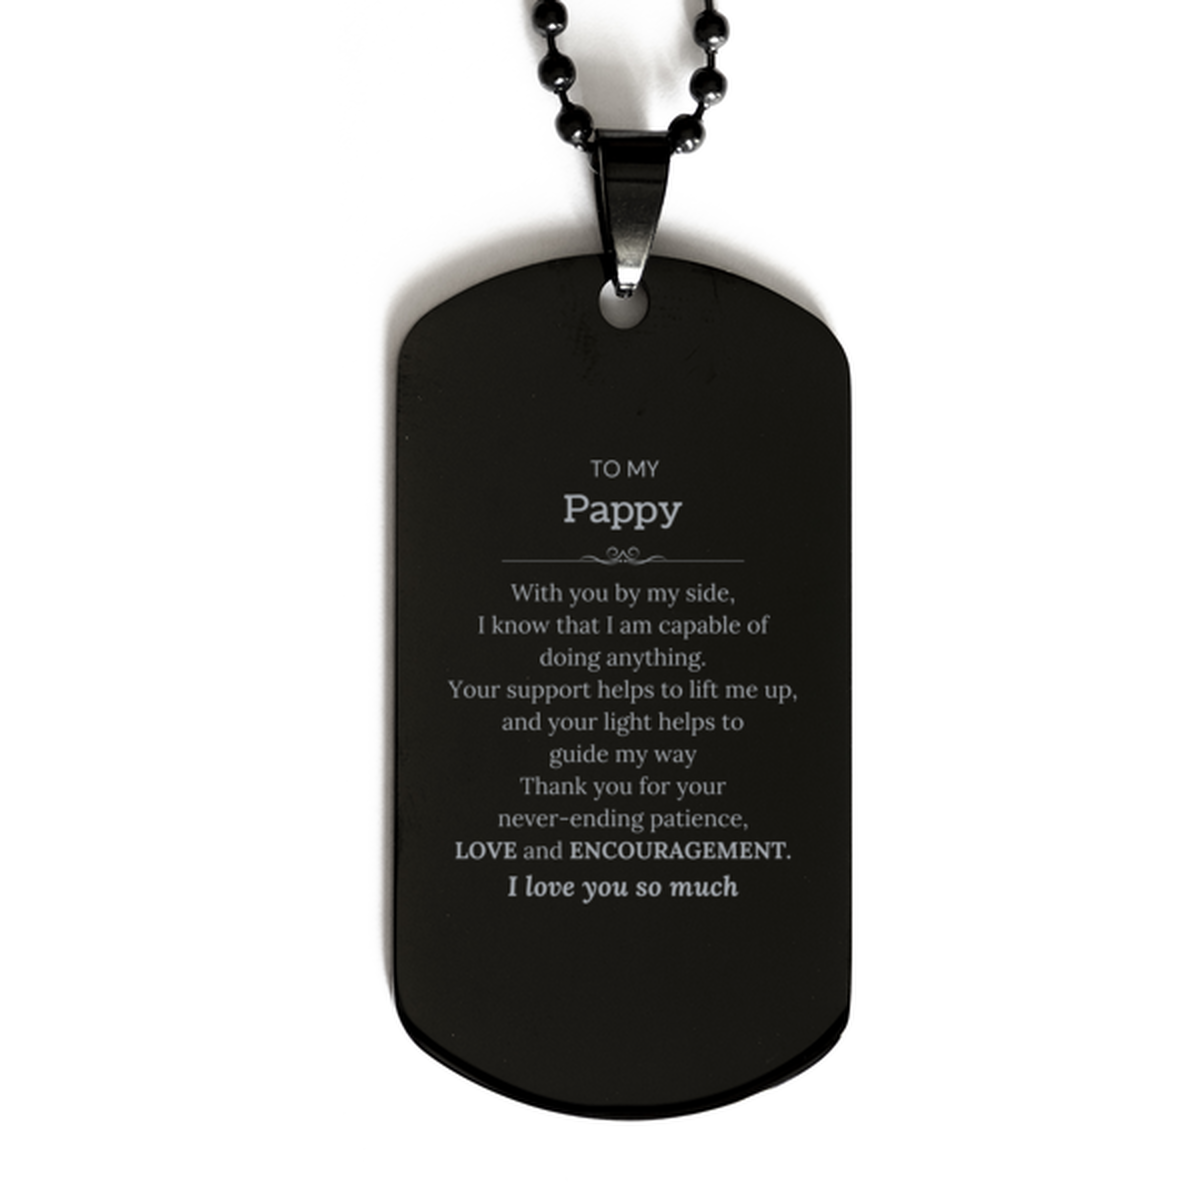 Appreciation Pappy Black Dog Tag Gifts, To My Pappy Birthday Christmas Wedding Keepsake Gifts for Pappy With you by my side, I know that I am capable of doing anything. I love you so much